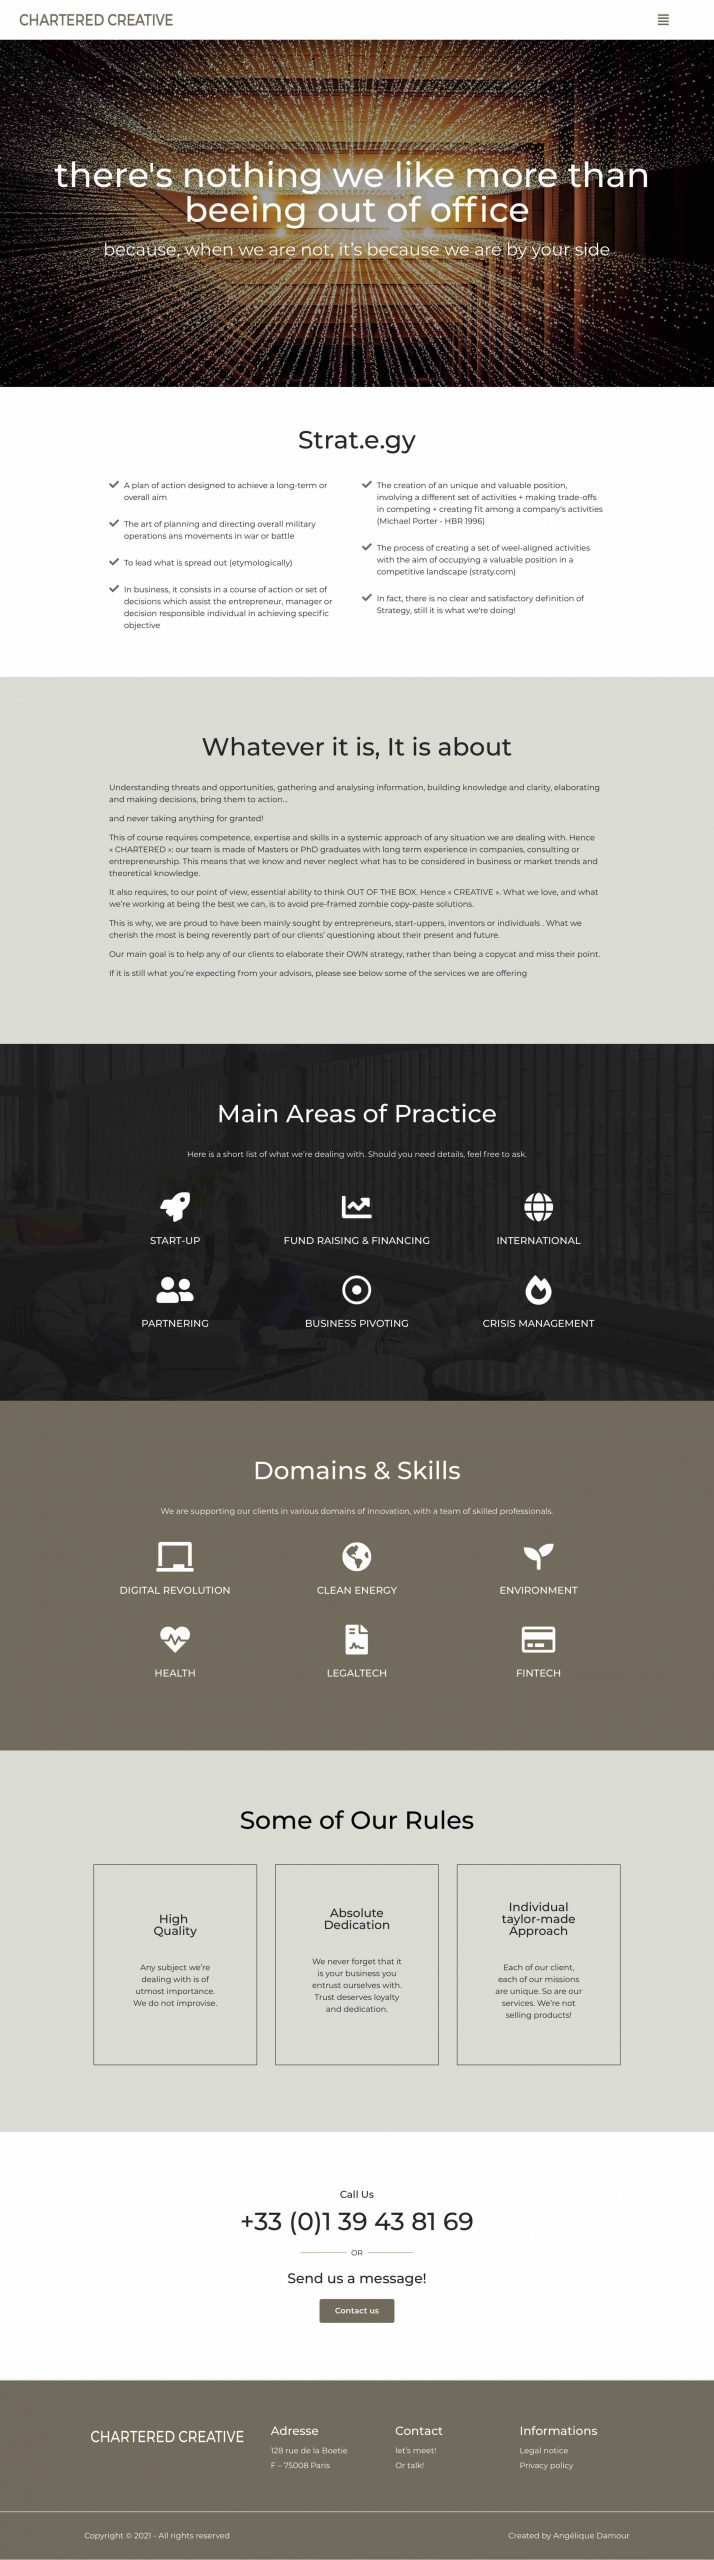 ANGELIQUE DAMOUR - Projet Chartered Creative - home page full screen